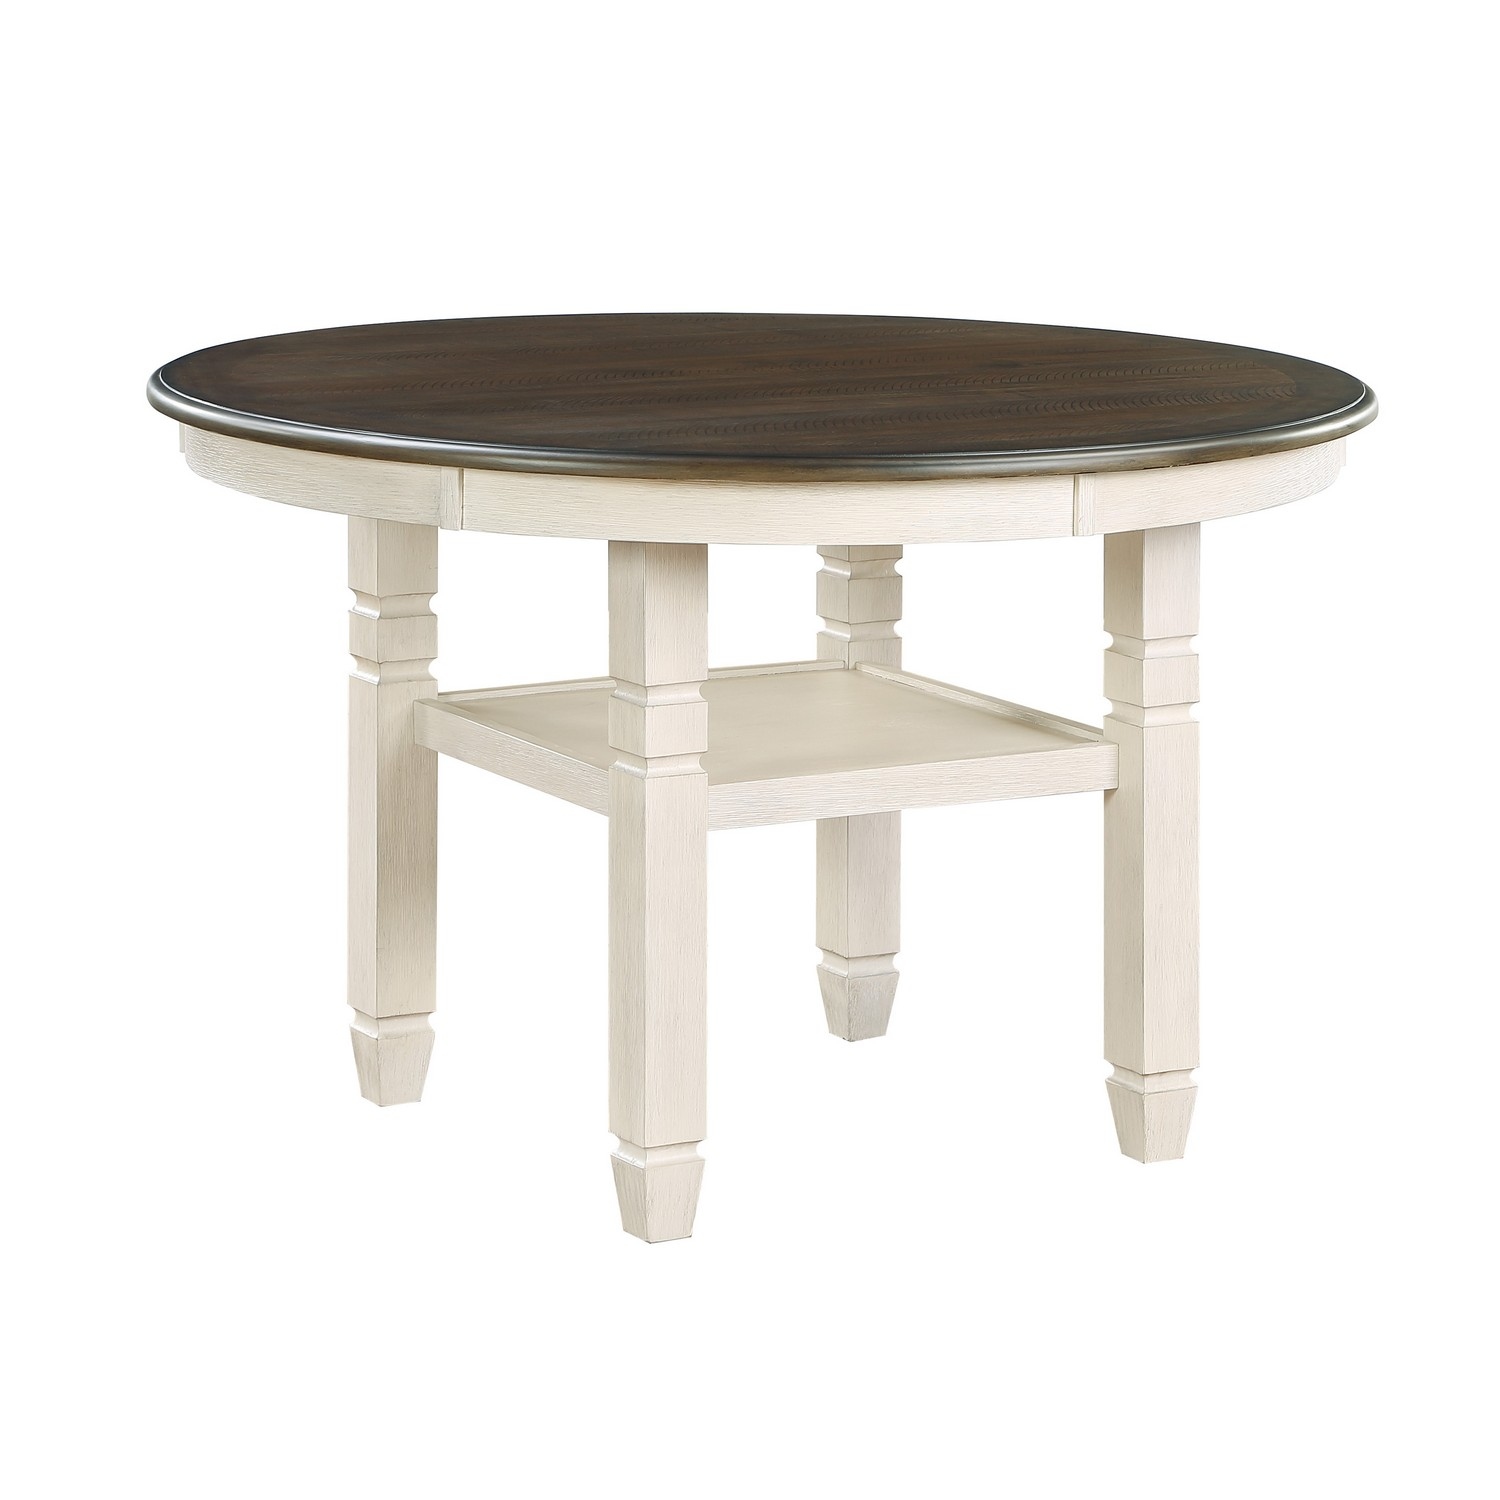 Homelegance Asher Dining Table - Brown/Antique White